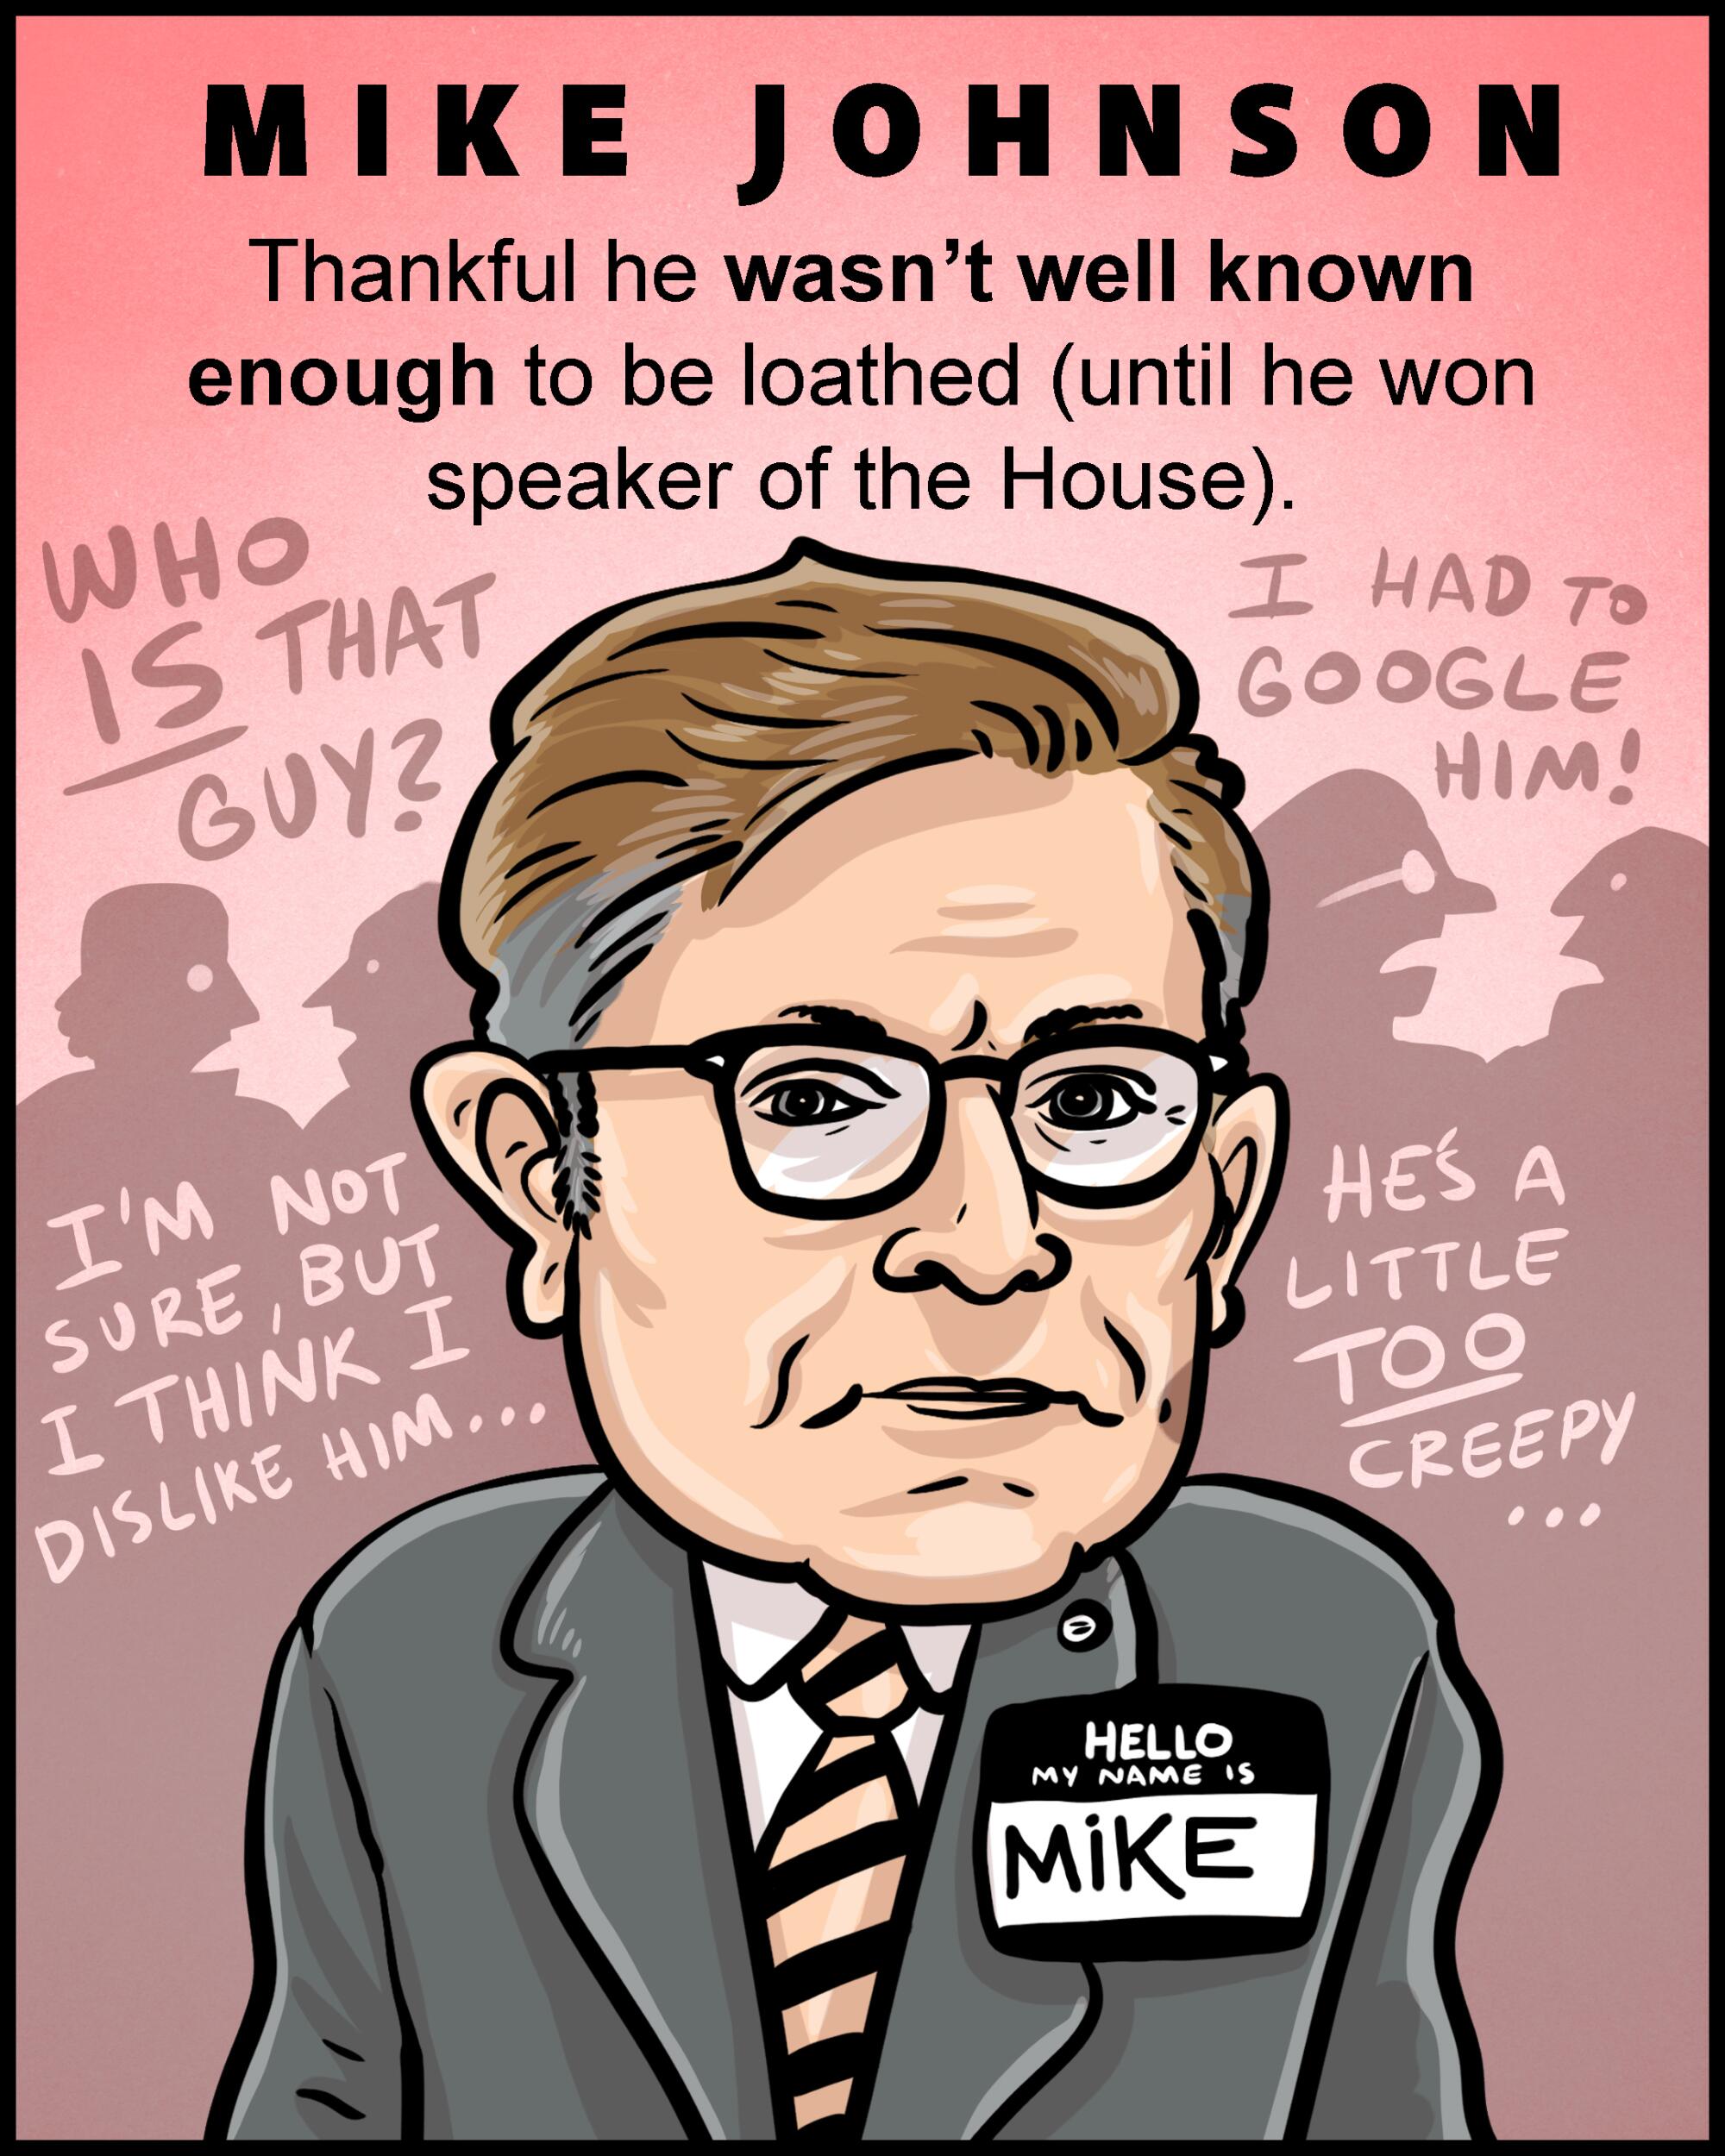 Mike Johnson - Thankful he wasn't well known enough to be loathed (until he won speaker of the House).